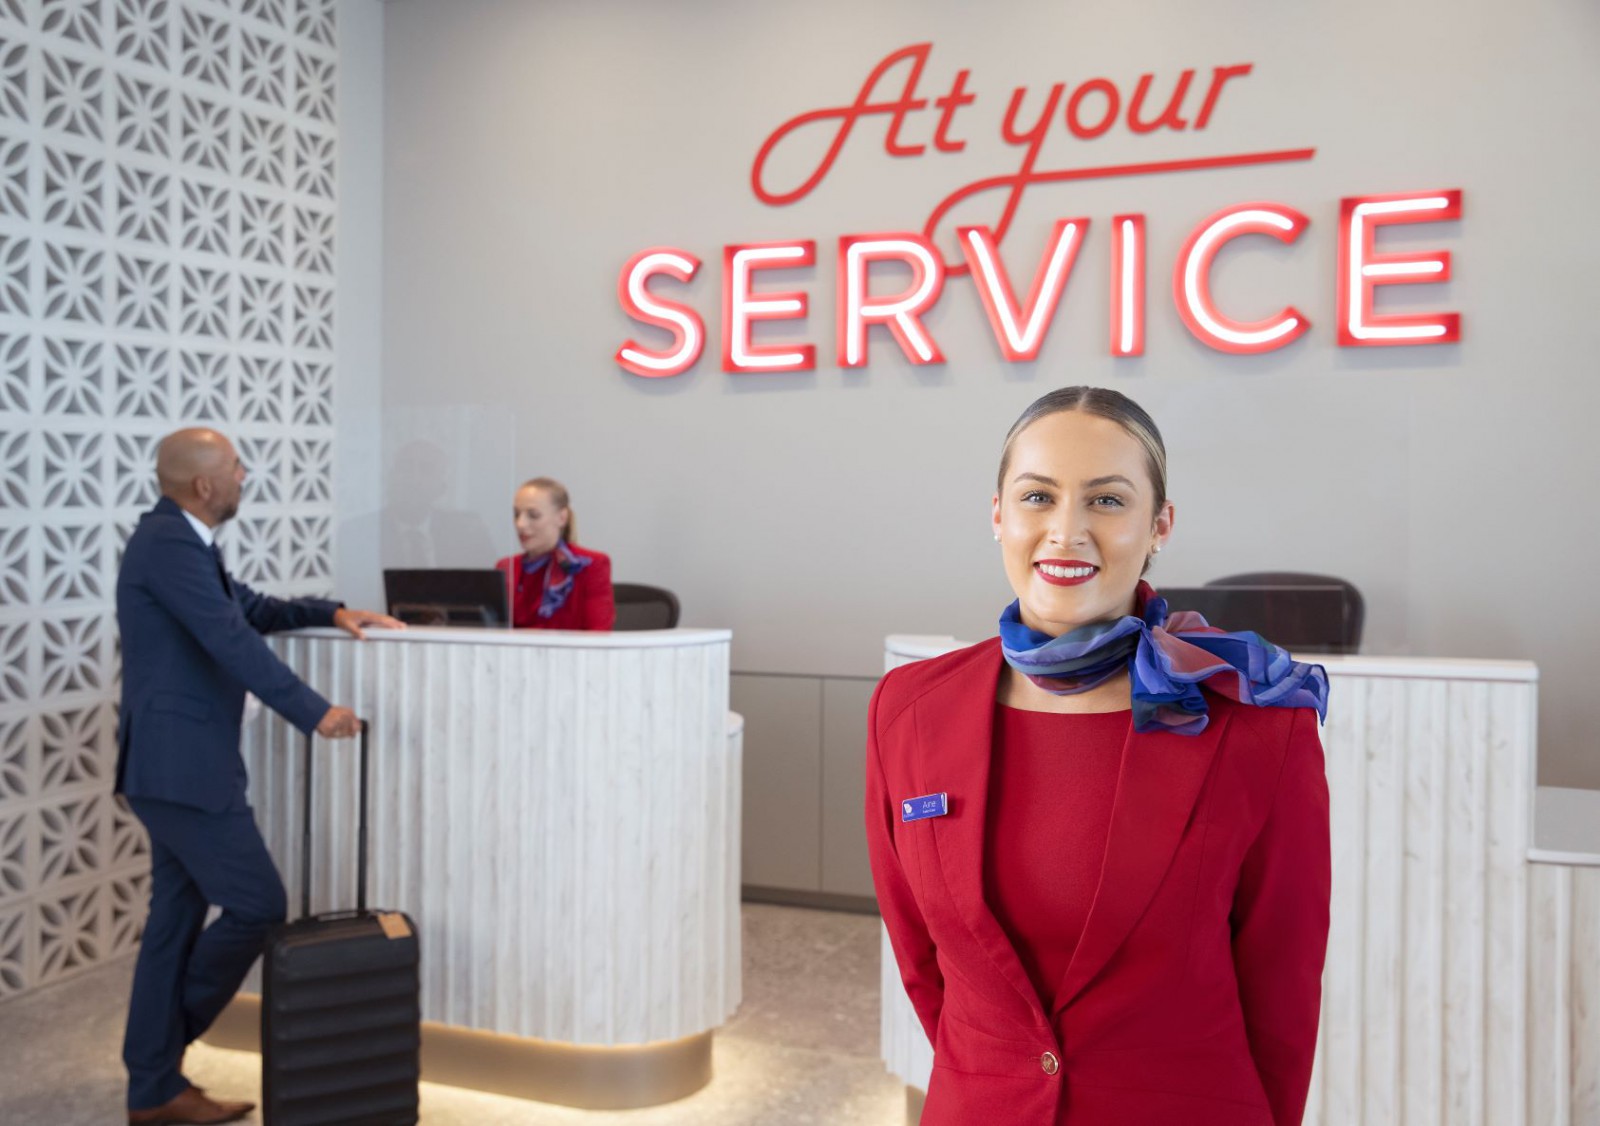 Virgin adds fast track